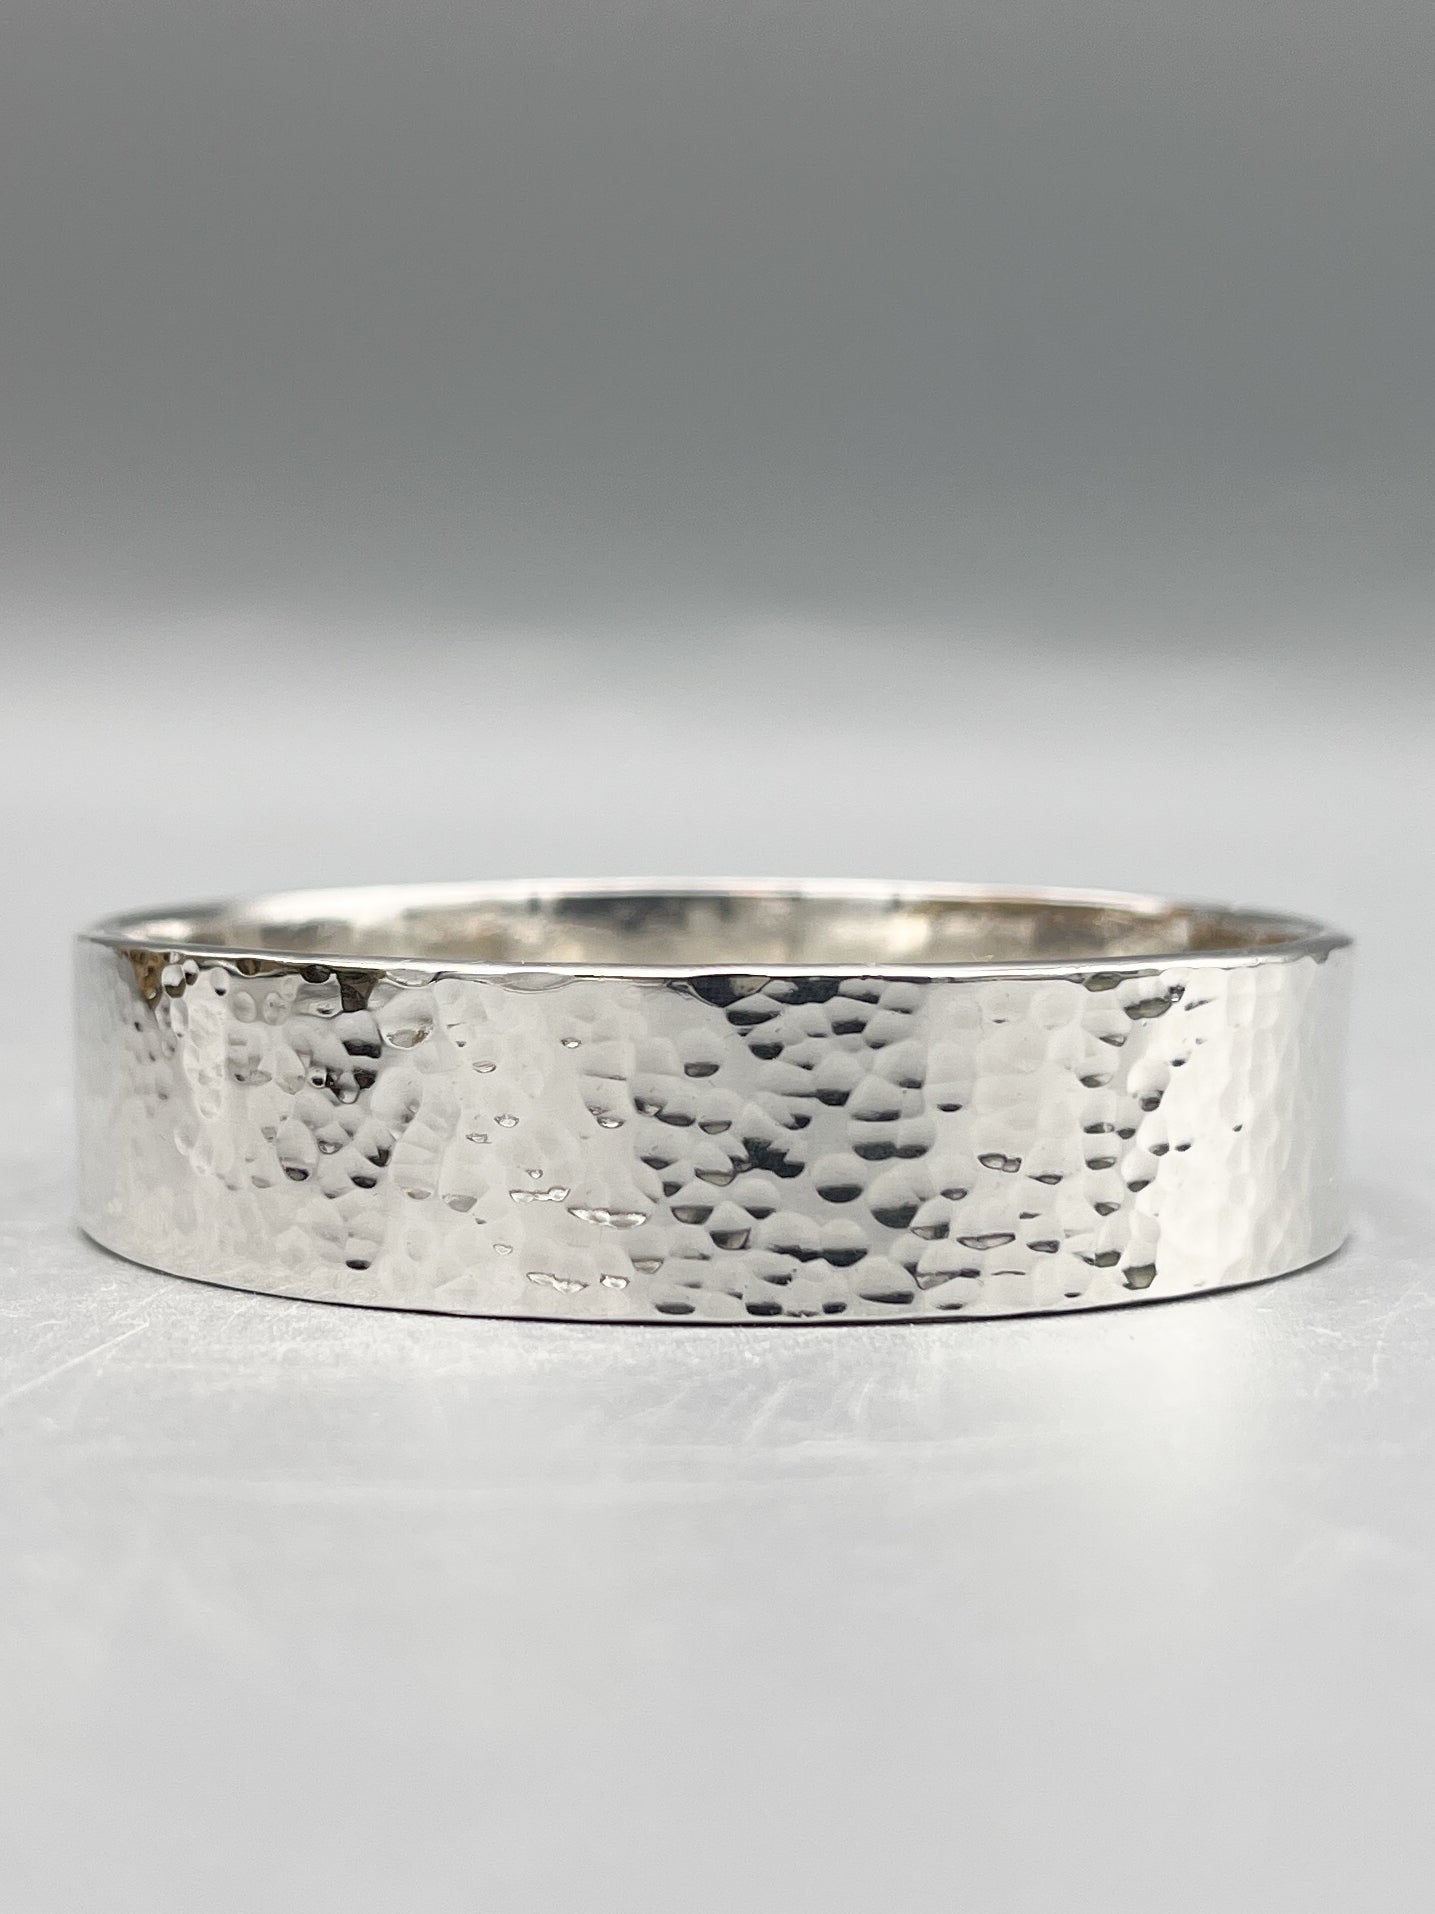 Sterling Silver Bangle, rectangular design with a hammered finish